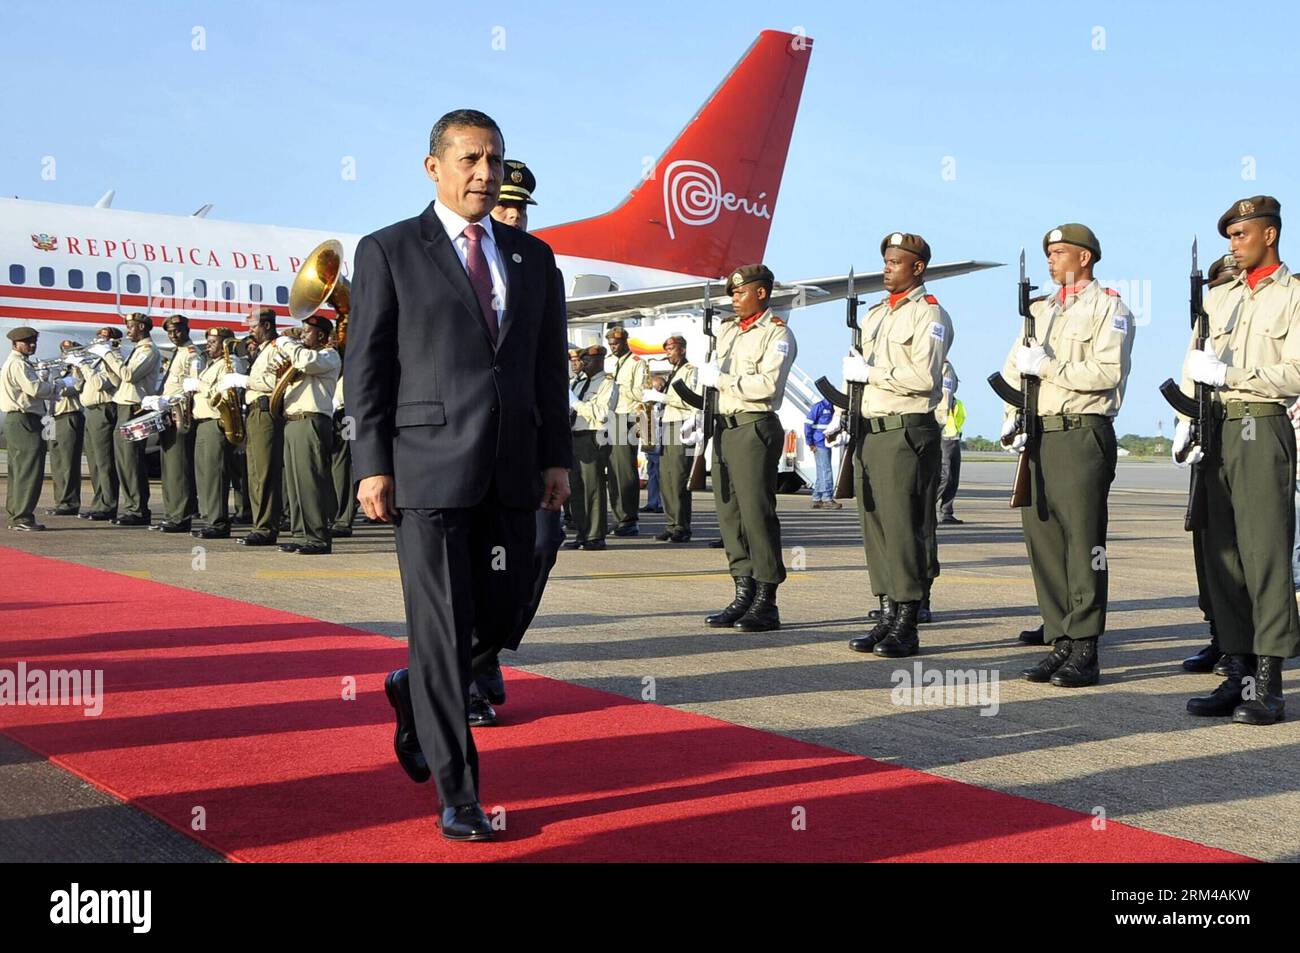 Bildnummer: 60415030  Datum: 30.08.2013  Copyright: imago/Xinhua PARAMARIBO, Aug. 30, 2013 - Image provided by Peru s Presidency shows Peruvian President Ollanta Humala(Front) arrives at the Johan Adolf Pendel International Airport before the 7th Summit of the Union of South American Nations (UNASUR) in Paramaribo, capital of Suriname, on Aug. 30, 2013. (Xinhua/Peru s Presidency) (fnc) (sp) SURINAME-PARAMARIBO-UNASUR-POLITICS-SUMMIT PUBLICATIONxNOTxINxCHN people xas x0x 2013 quer premiumd     60415030 Date 30 08 2013 Copyright Imago XINHUA Paramaribo Aug 30 2013 Image provided by Peru S Presid Stock Photo